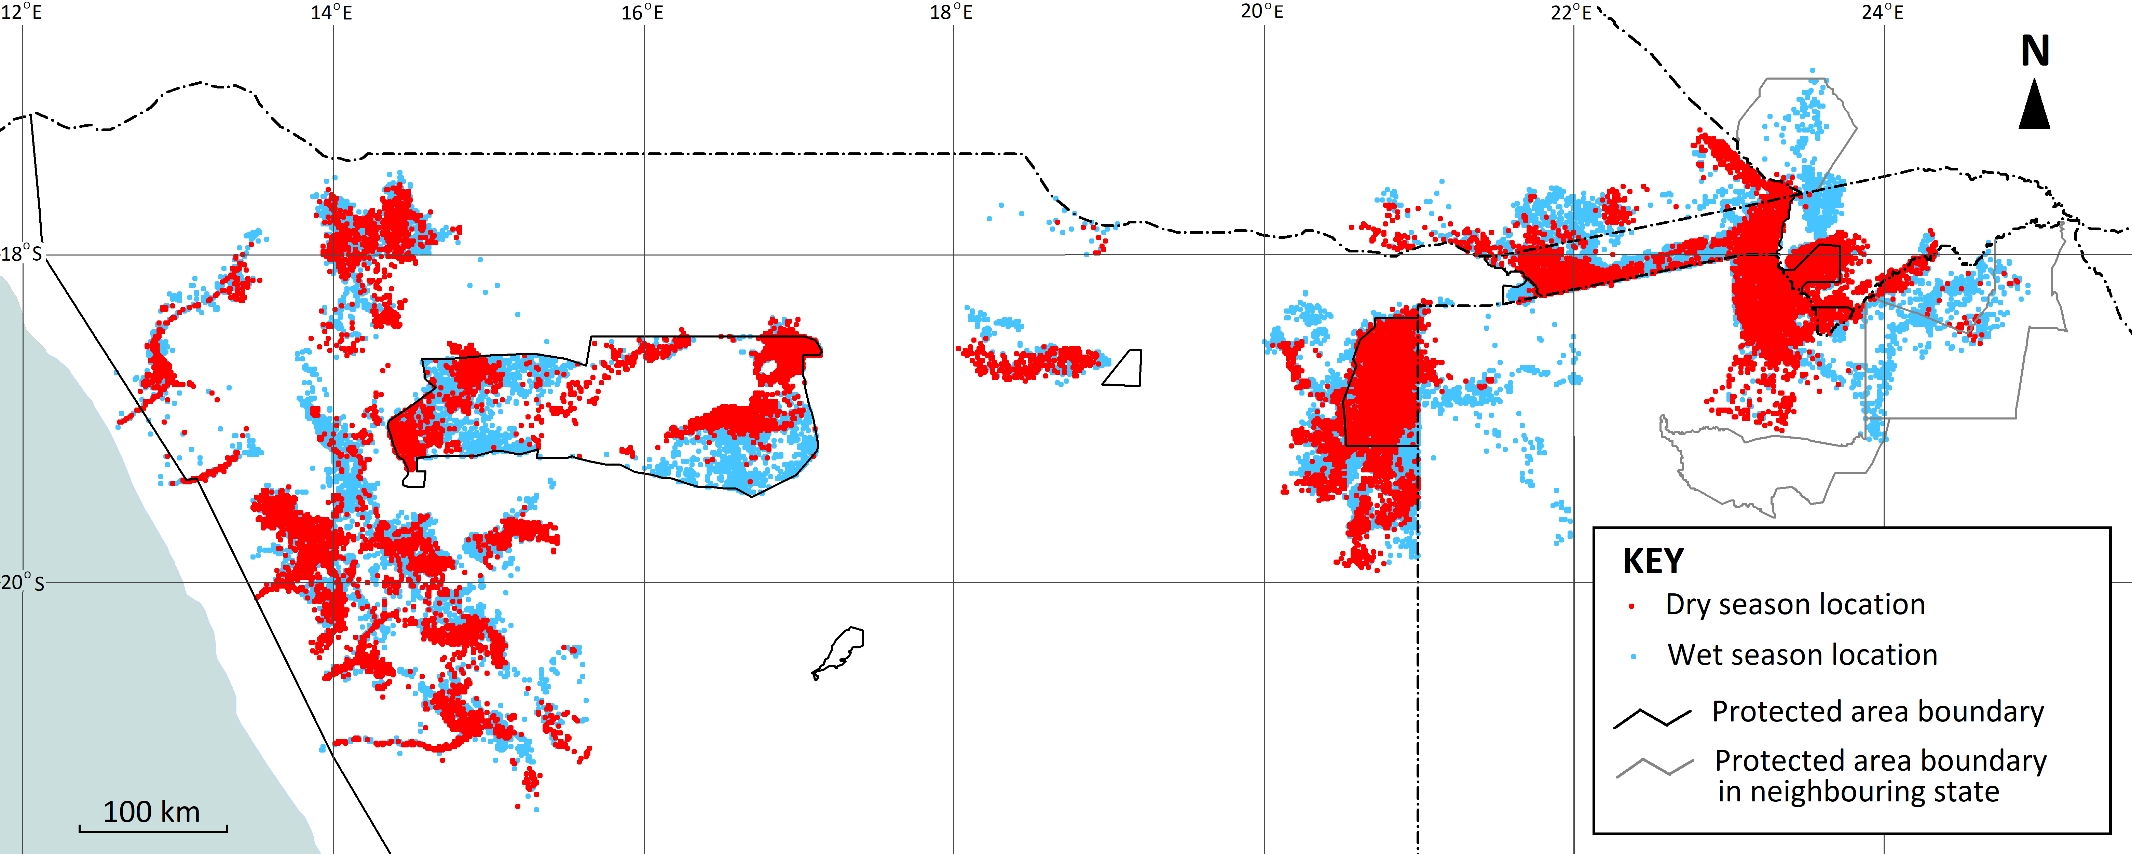 Seasonal Distribution: dry (red dots) overlaid on wet (blue dots) sightings.